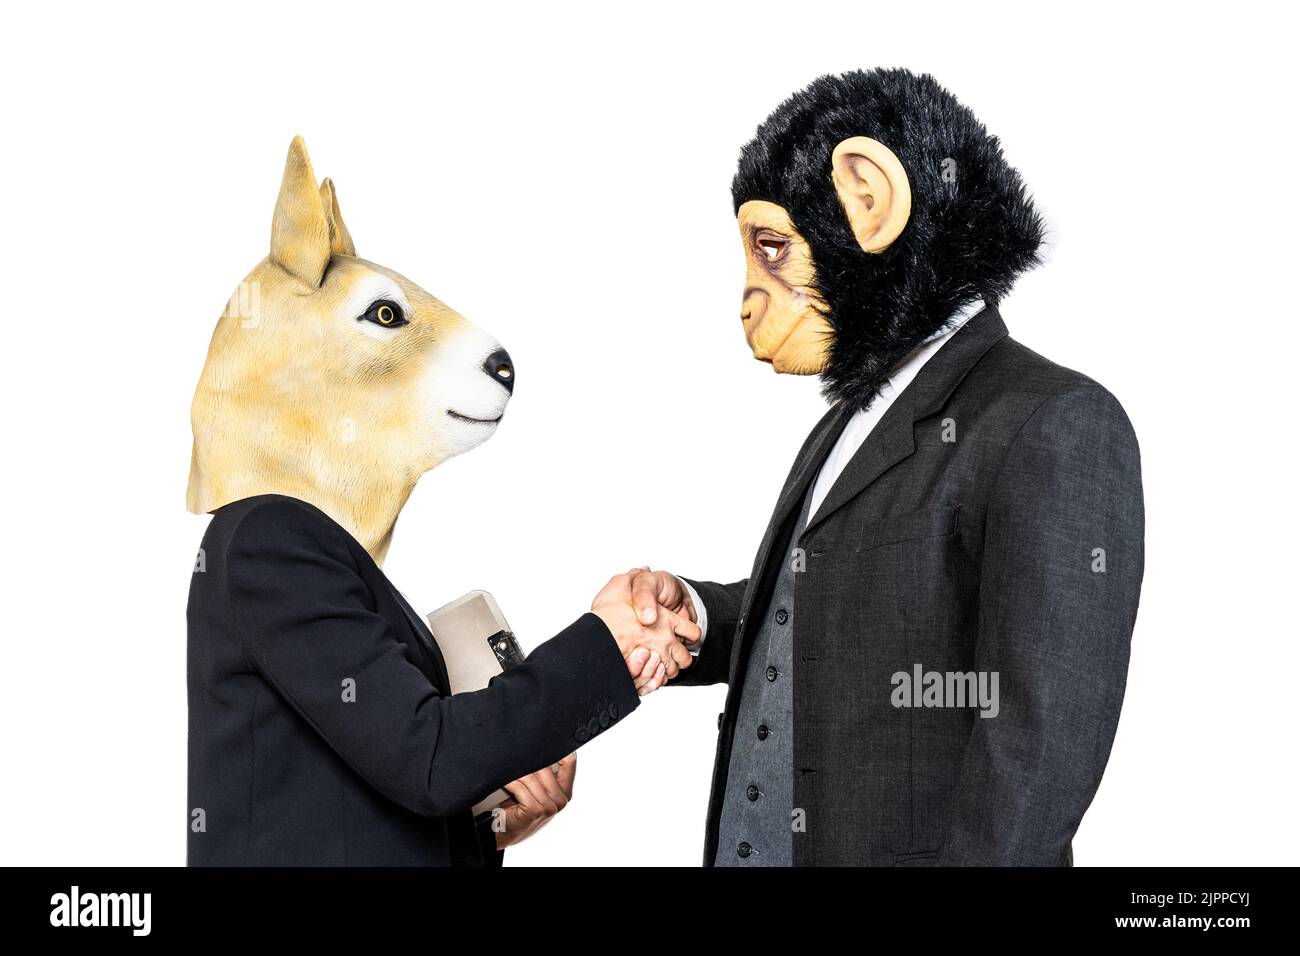 Business kangaroo woman and business monkey man squeezing their hands as a sign of deal. Isolated white background Stock Photo